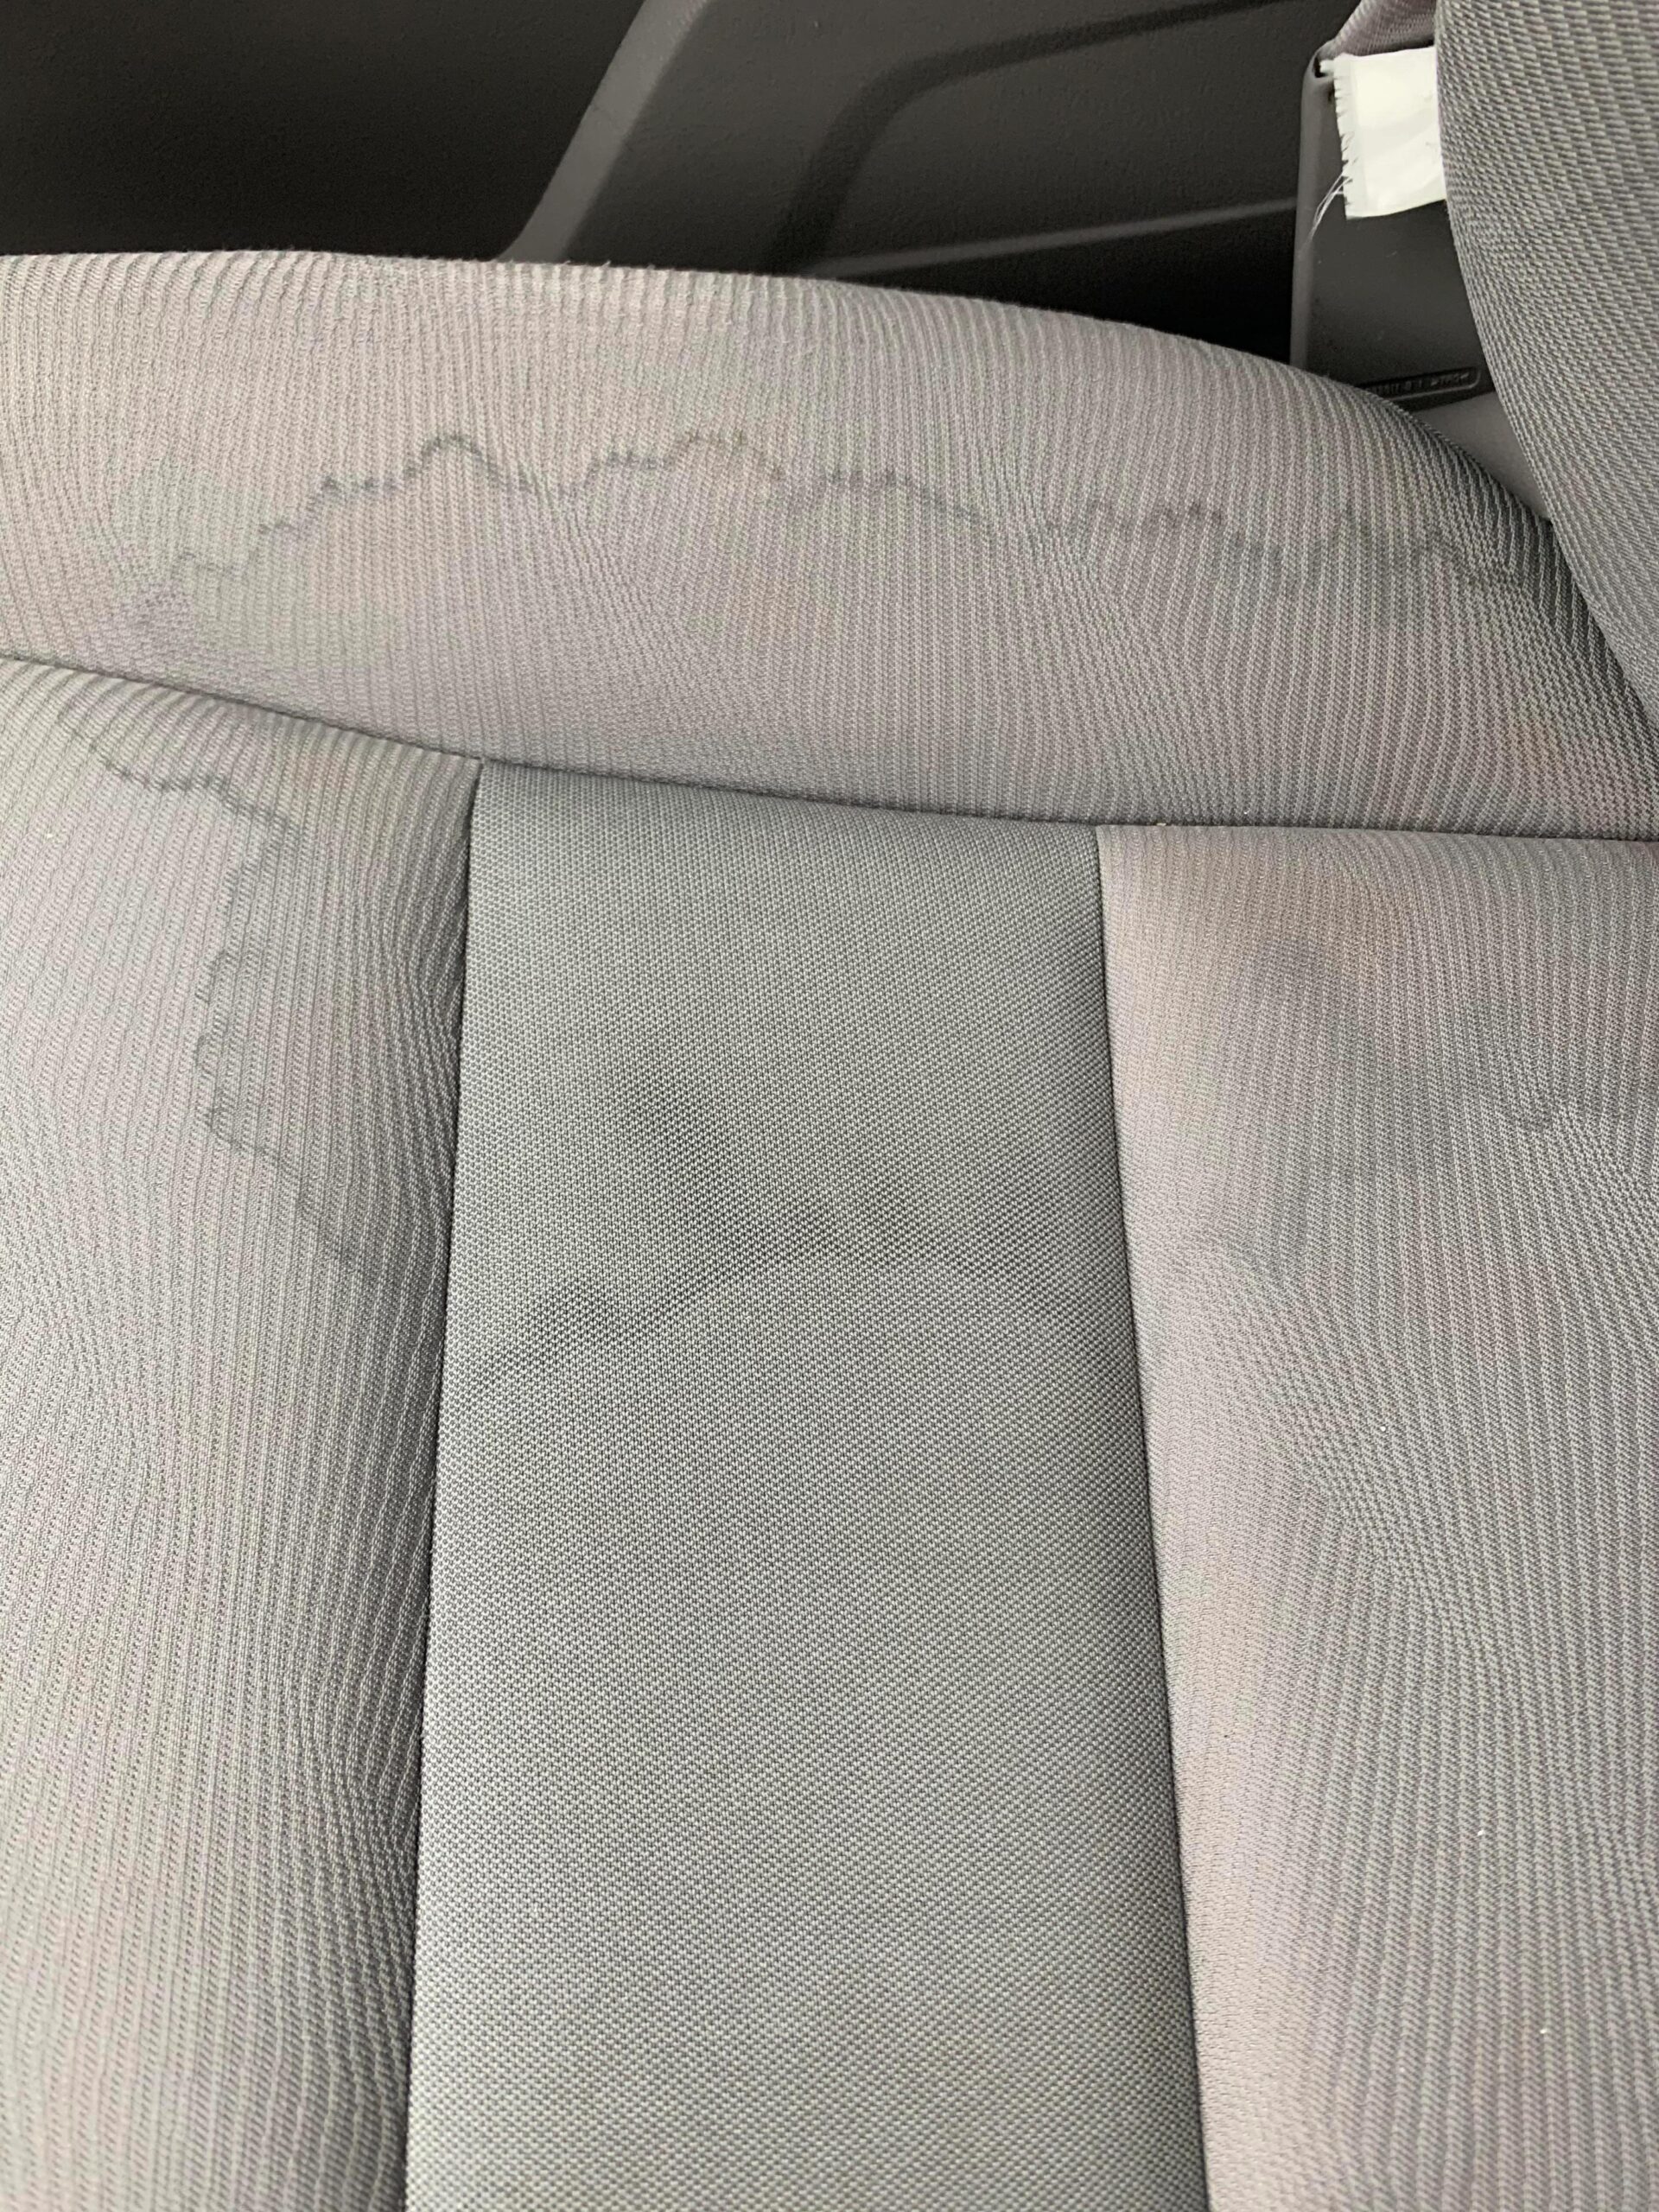 How to Get Rid of Water Stains from Car Seats